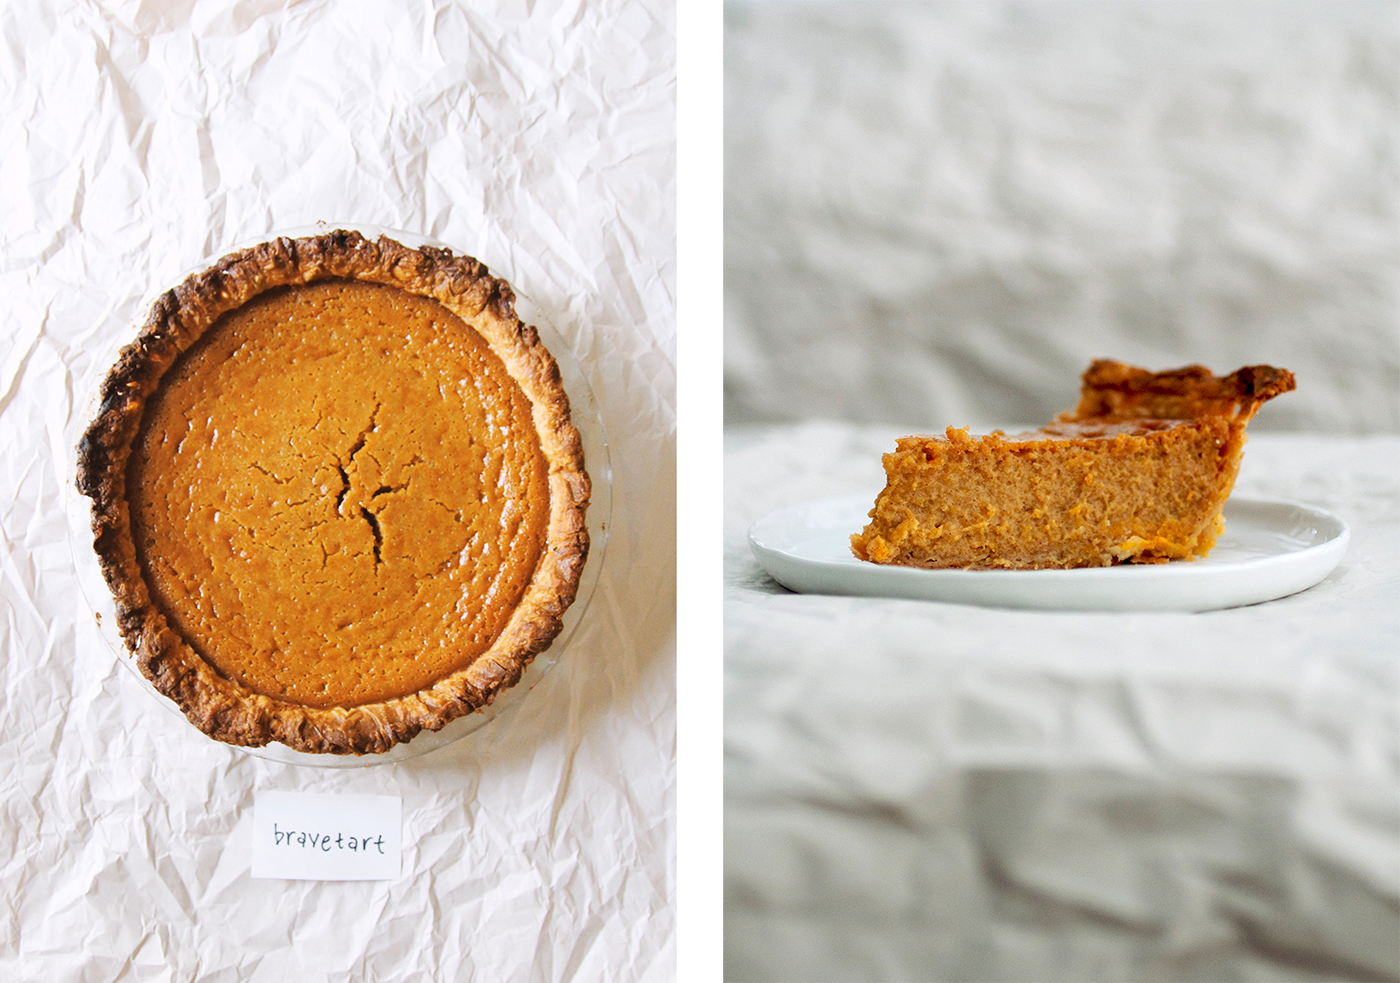 From left to right: Overhead view and sideview of Bravetarts's pumpkin pie recipe